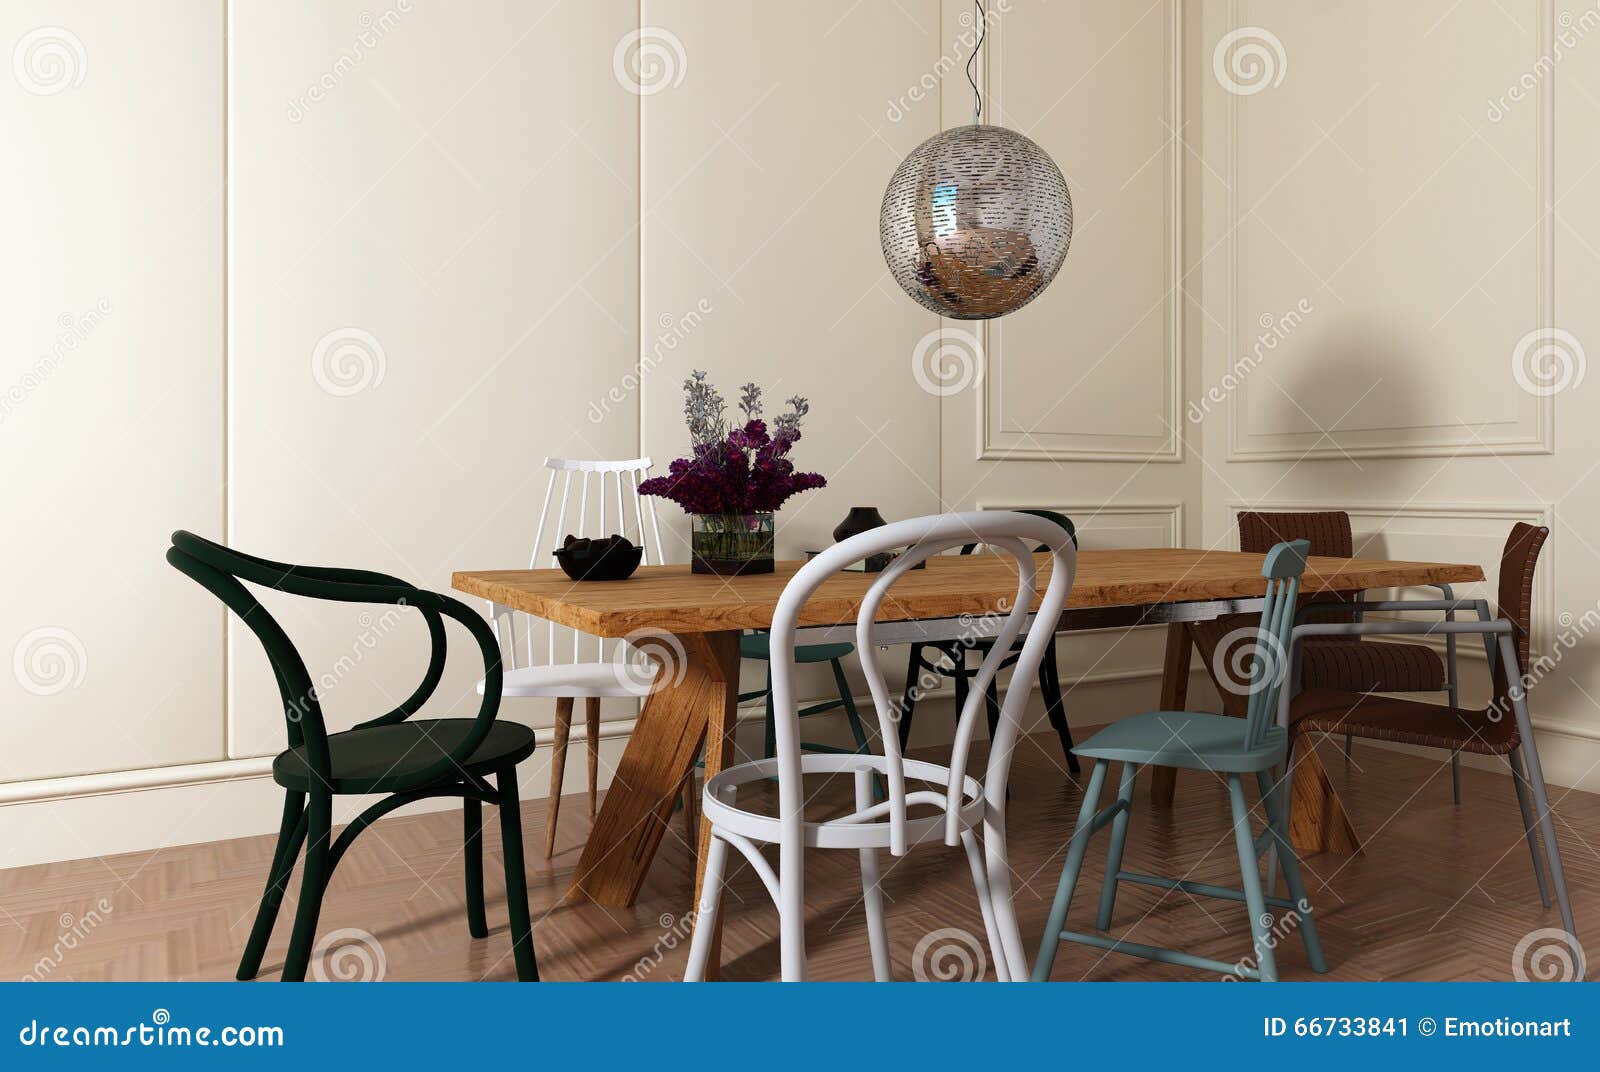 Dining Room With Wood Table And Mismatched Chairs Stock Image